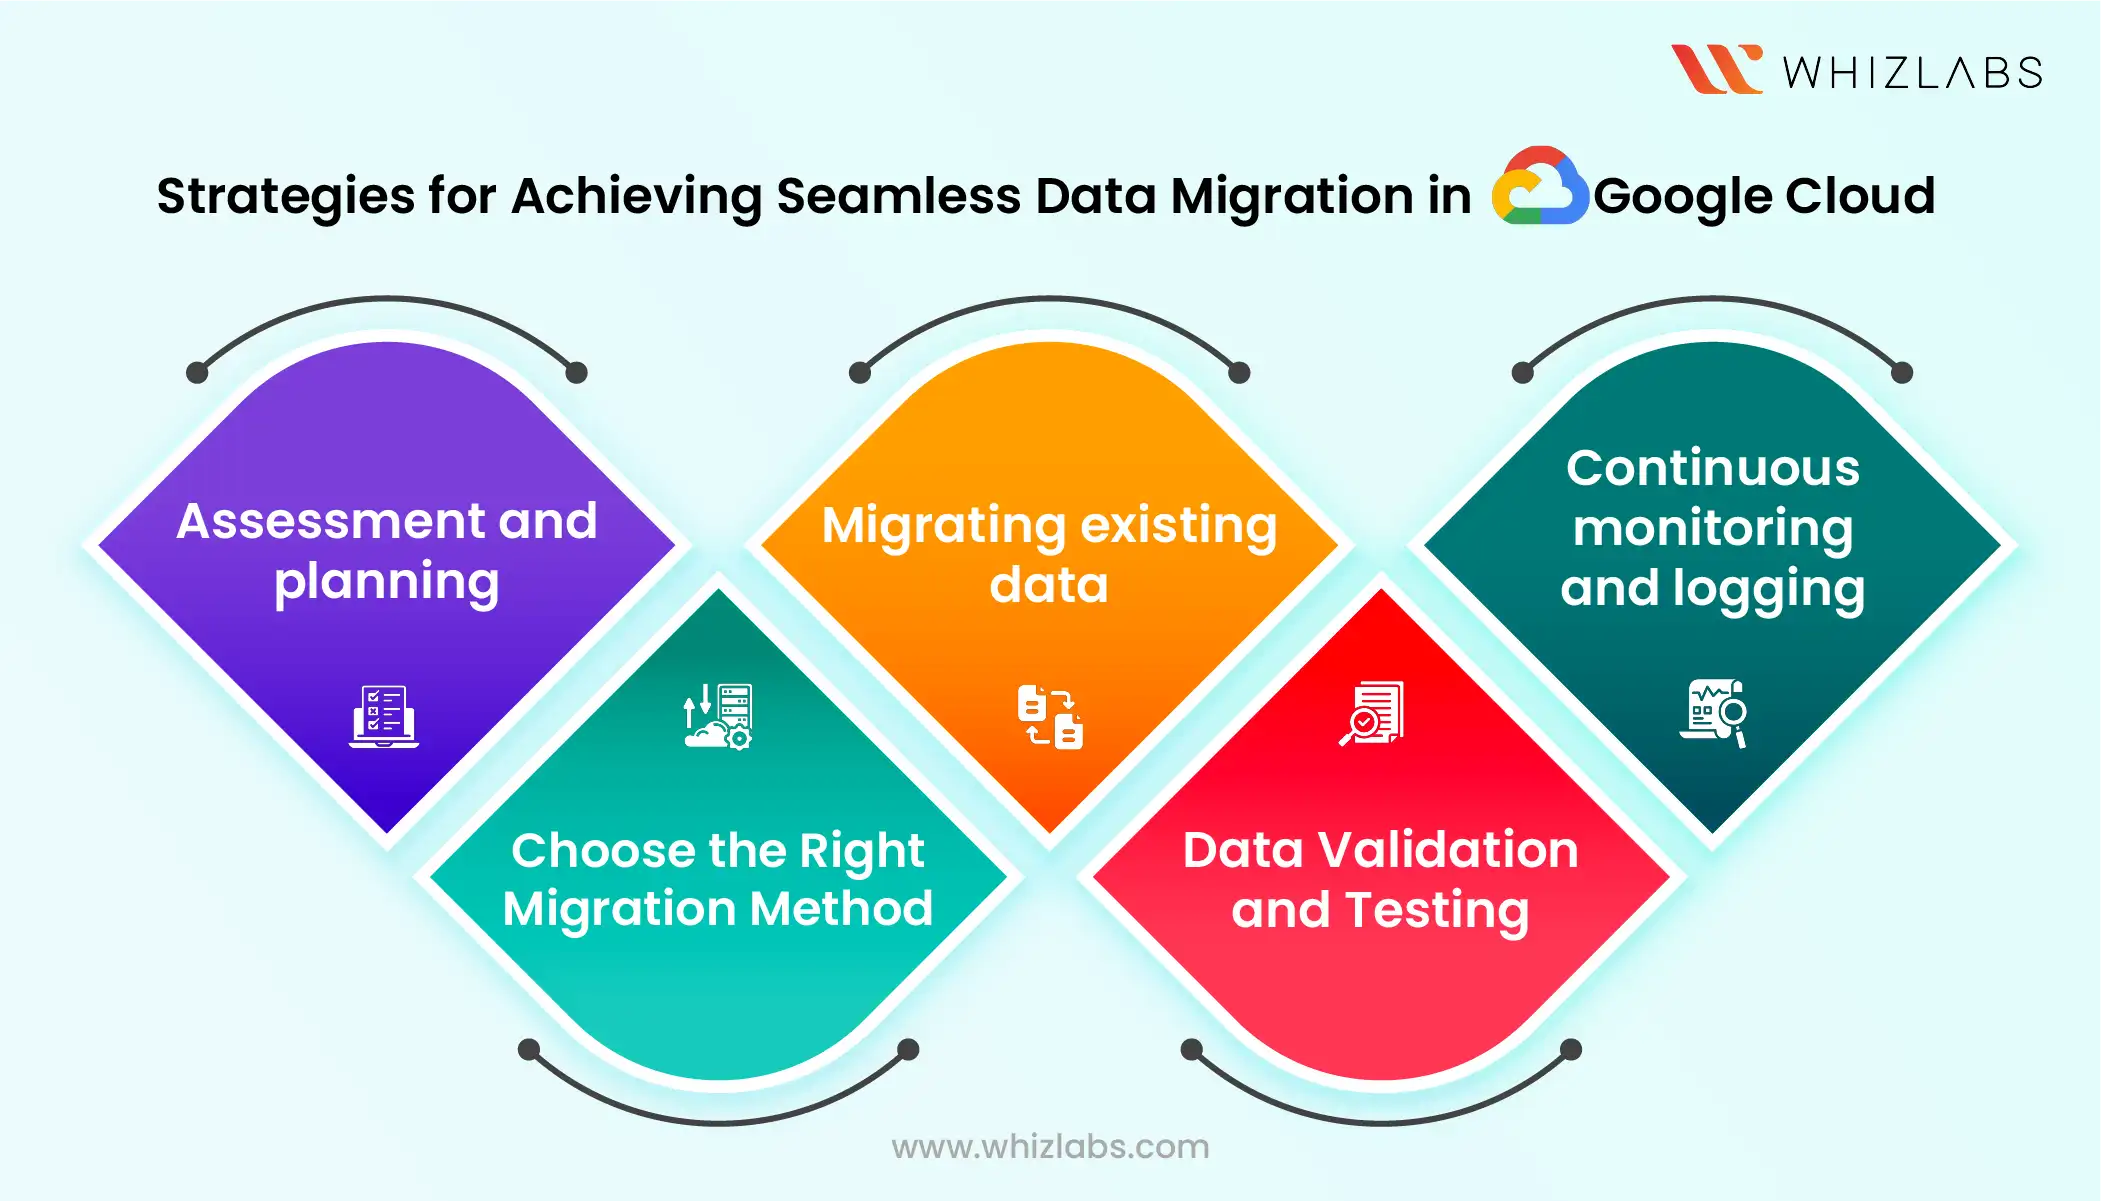 Strategies for Data Migration in Google Cloud